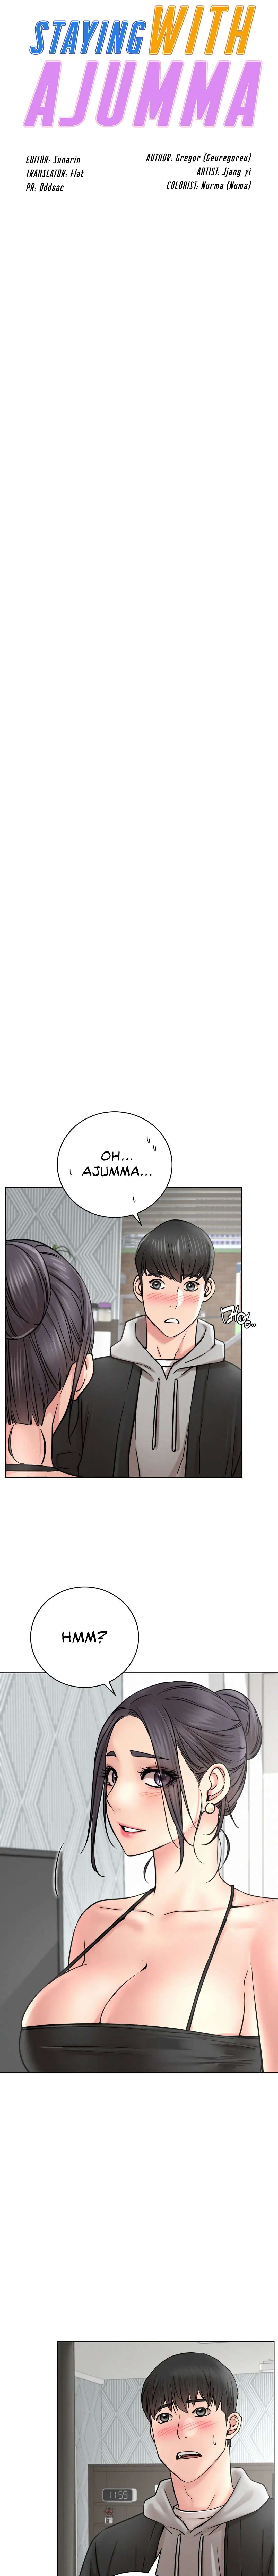 Staying With Ajumma - Page 3